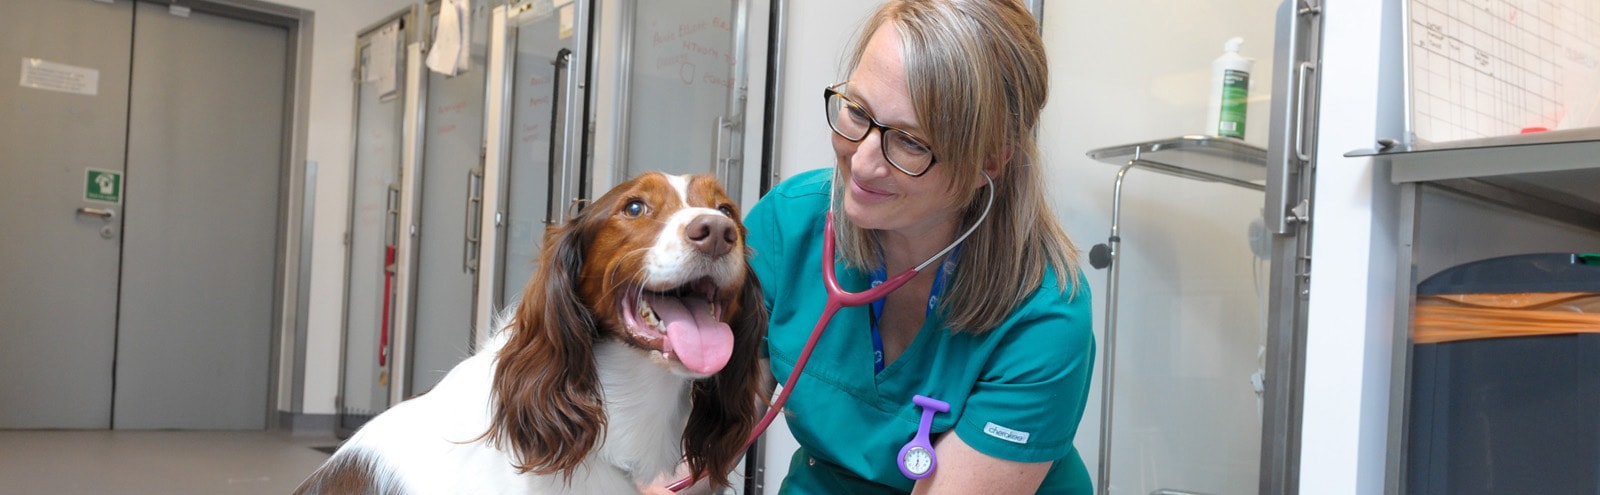 About West Midlands Veterinary Referrals in Staffordshire